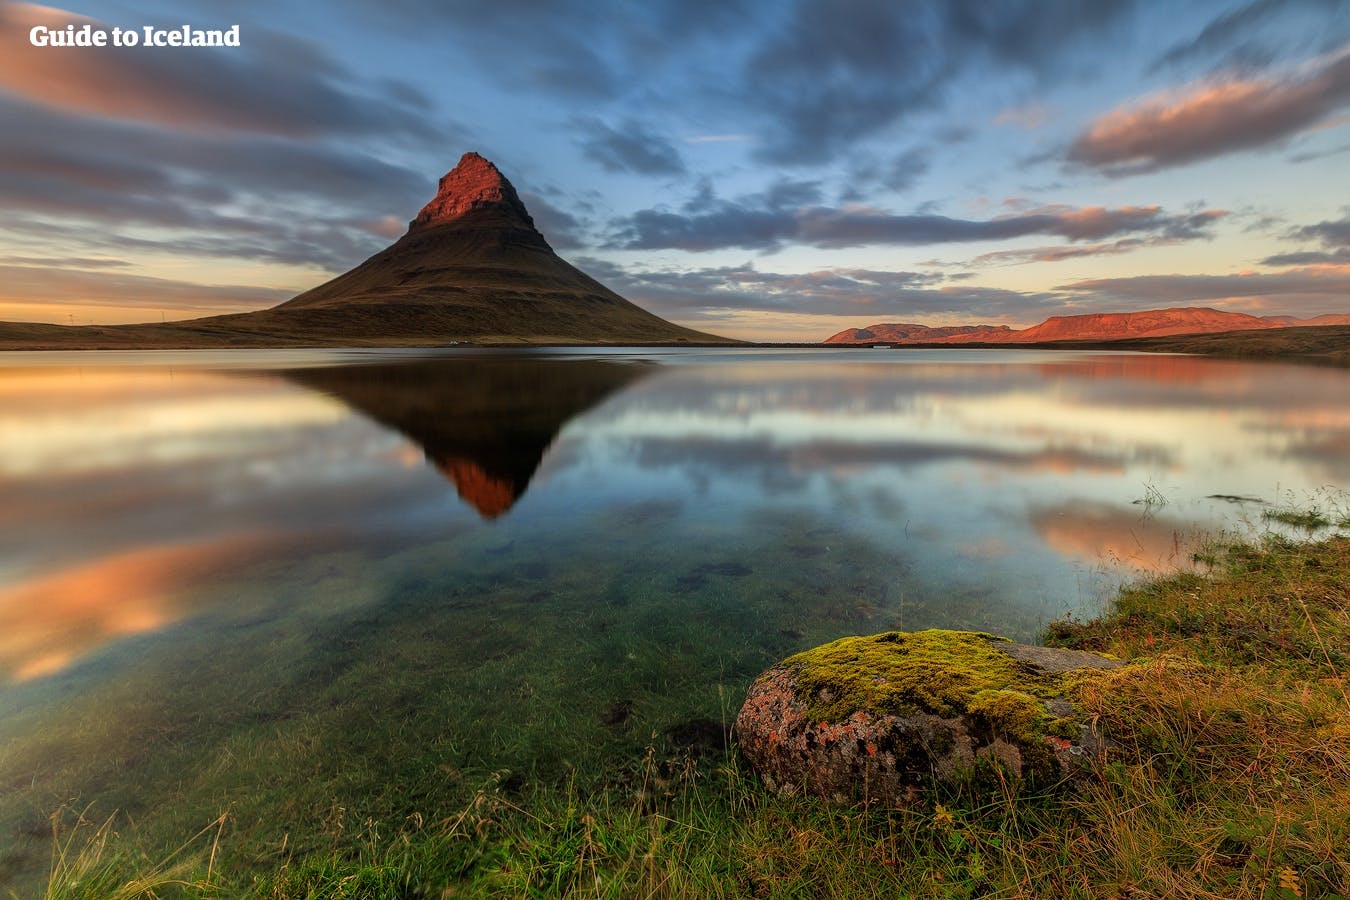 See Kirkjufell, one of Iceland's most beautiful mountains on this 13 Day Self Drive Tour on Budget.